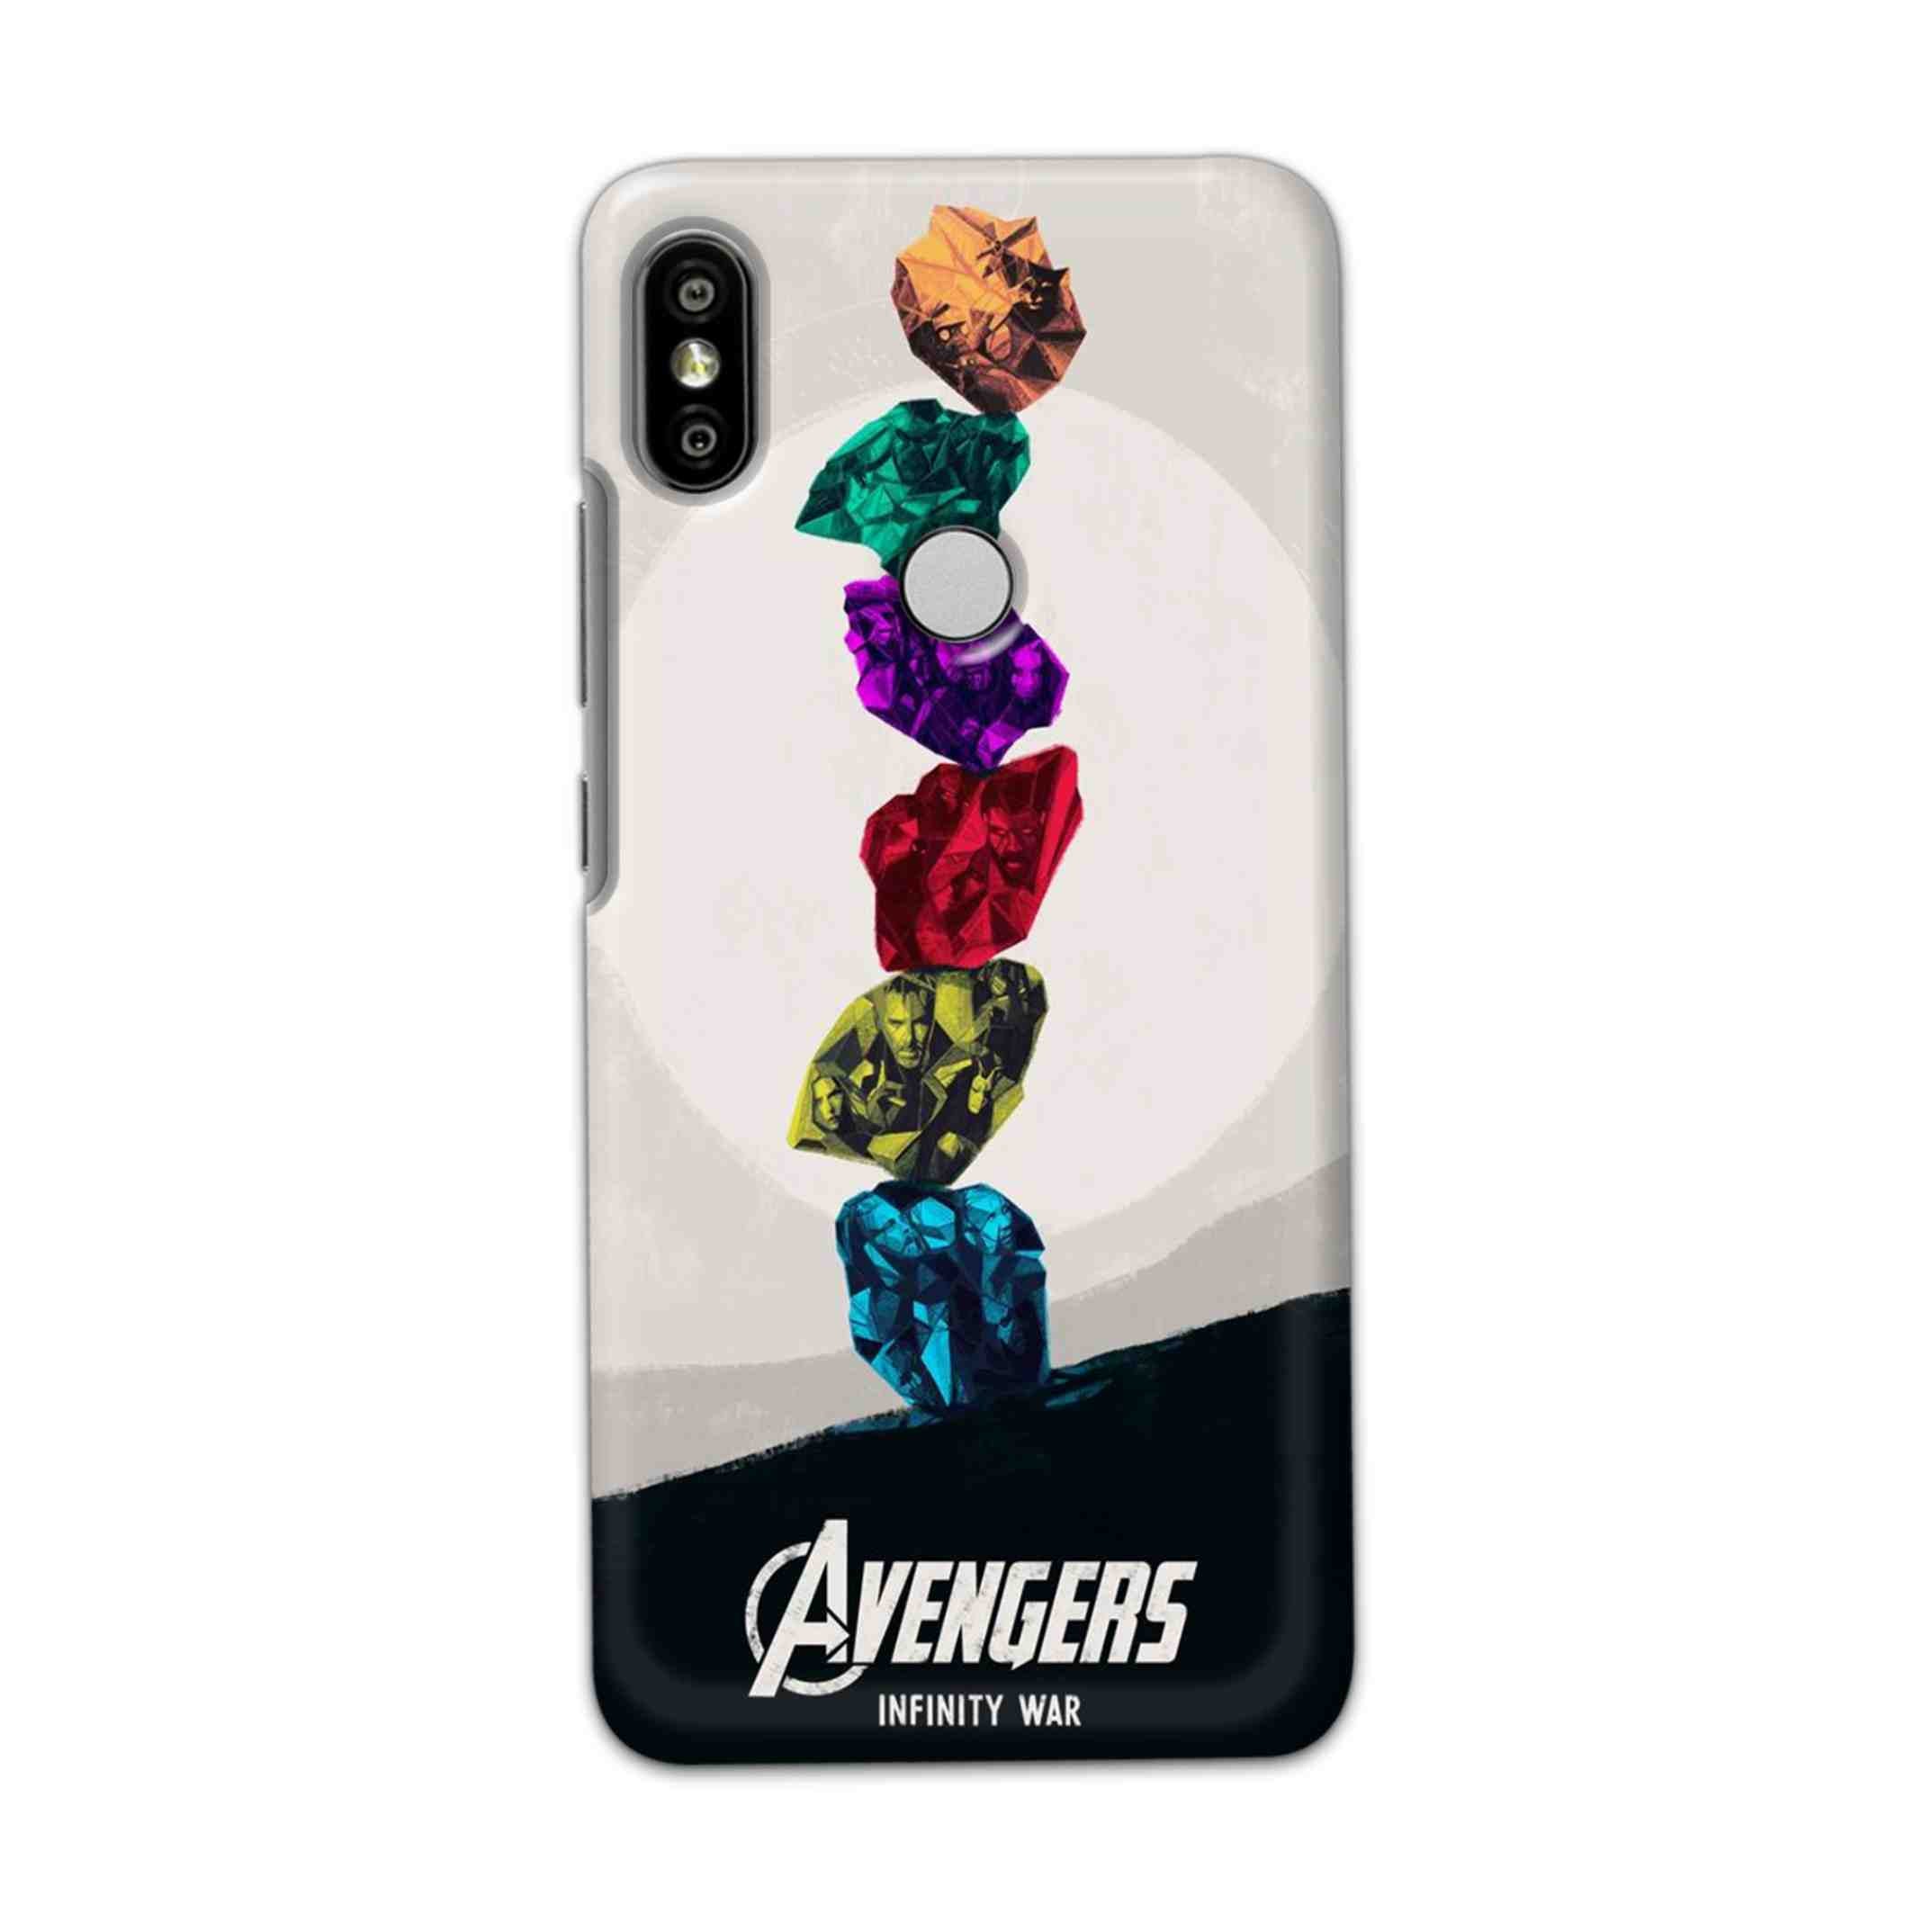 Buy Avengers Stone Hard Back Mobile Phone Case Cover For Redmi S2 / Y2 Online